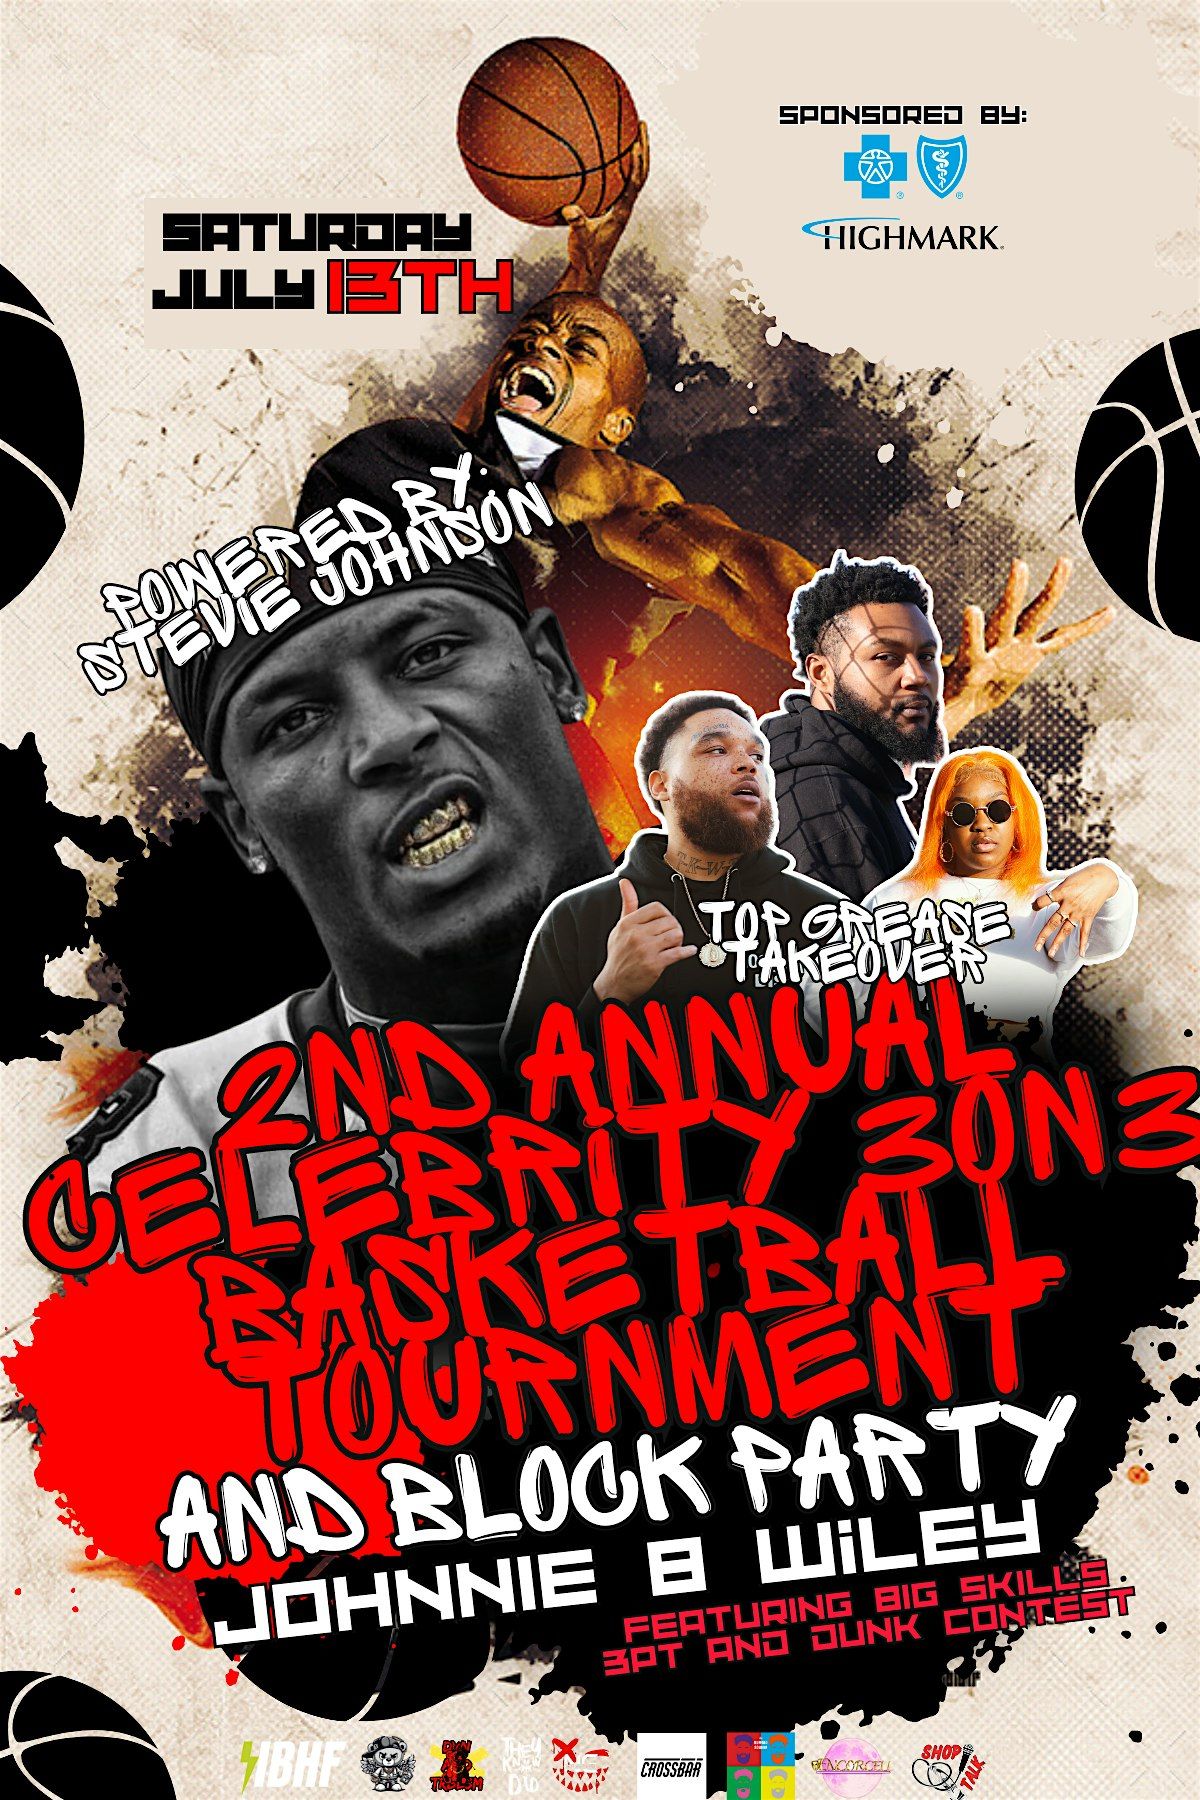 2ND ANNUAL CELEBRITY 3ON3 BASKETBALL TOURNAMENT AND BLOCK PARTY